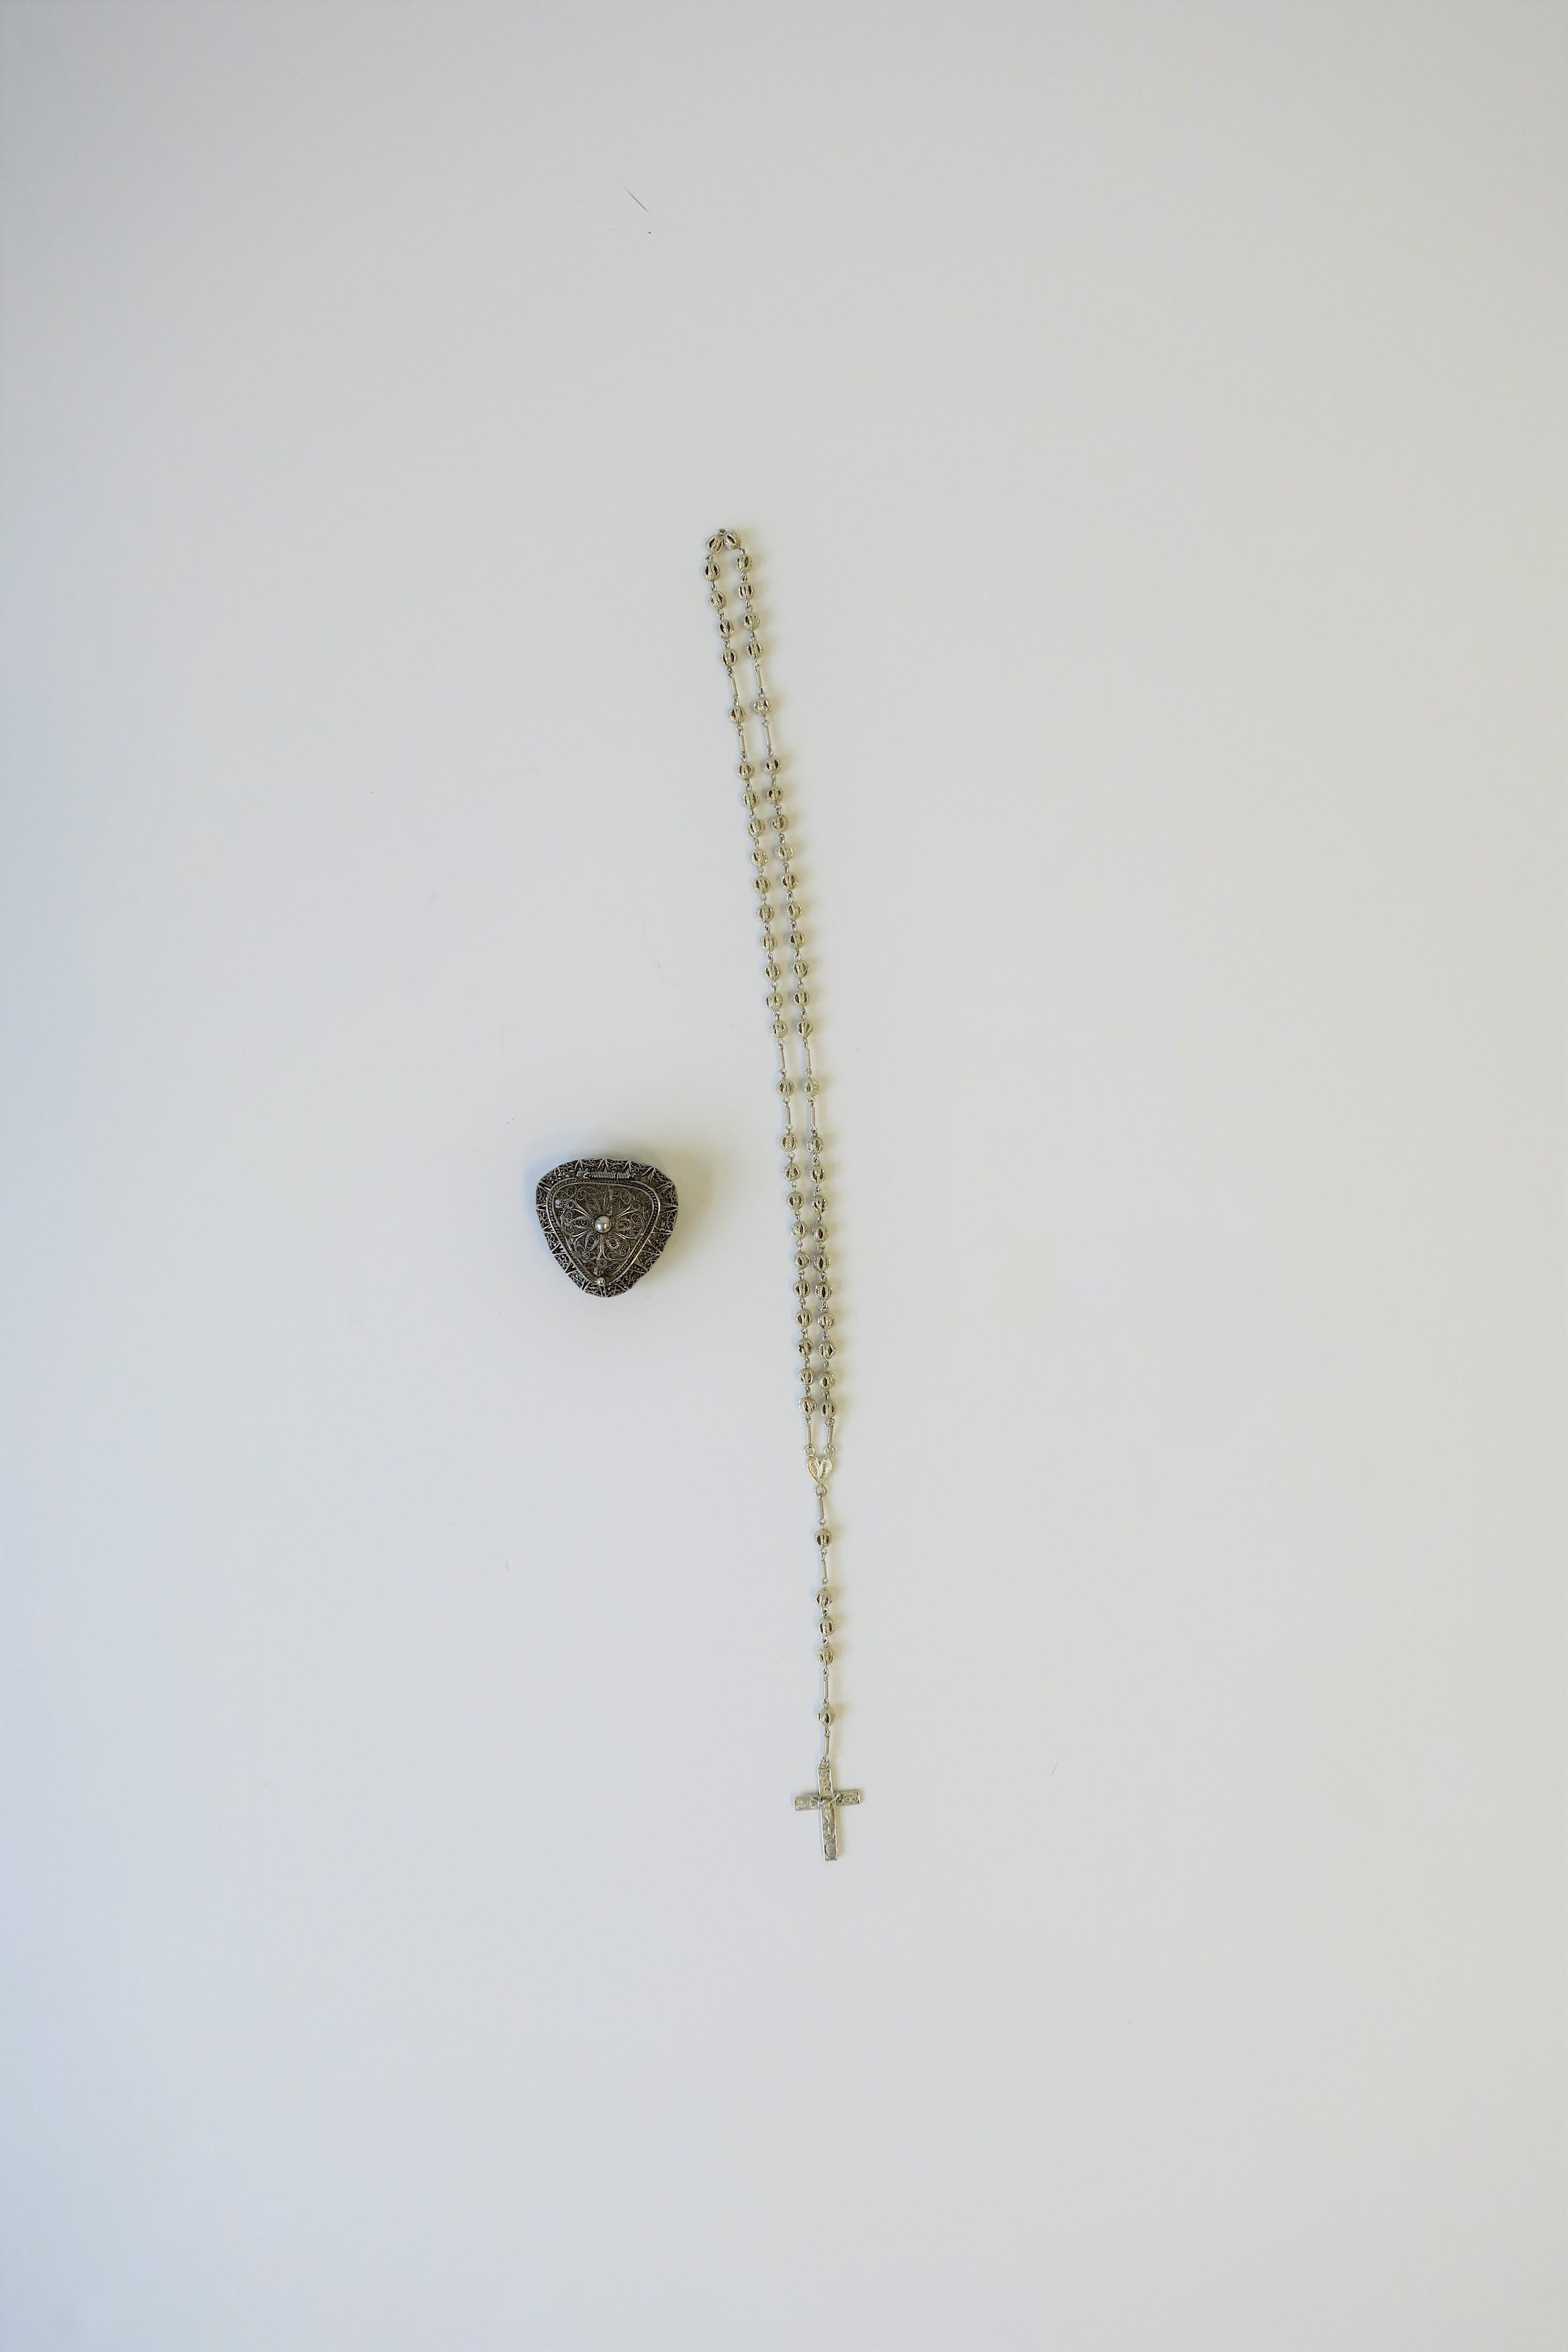 20th Century Italian Sterling Silver Rosary Beads in Heart Shaped Box 6